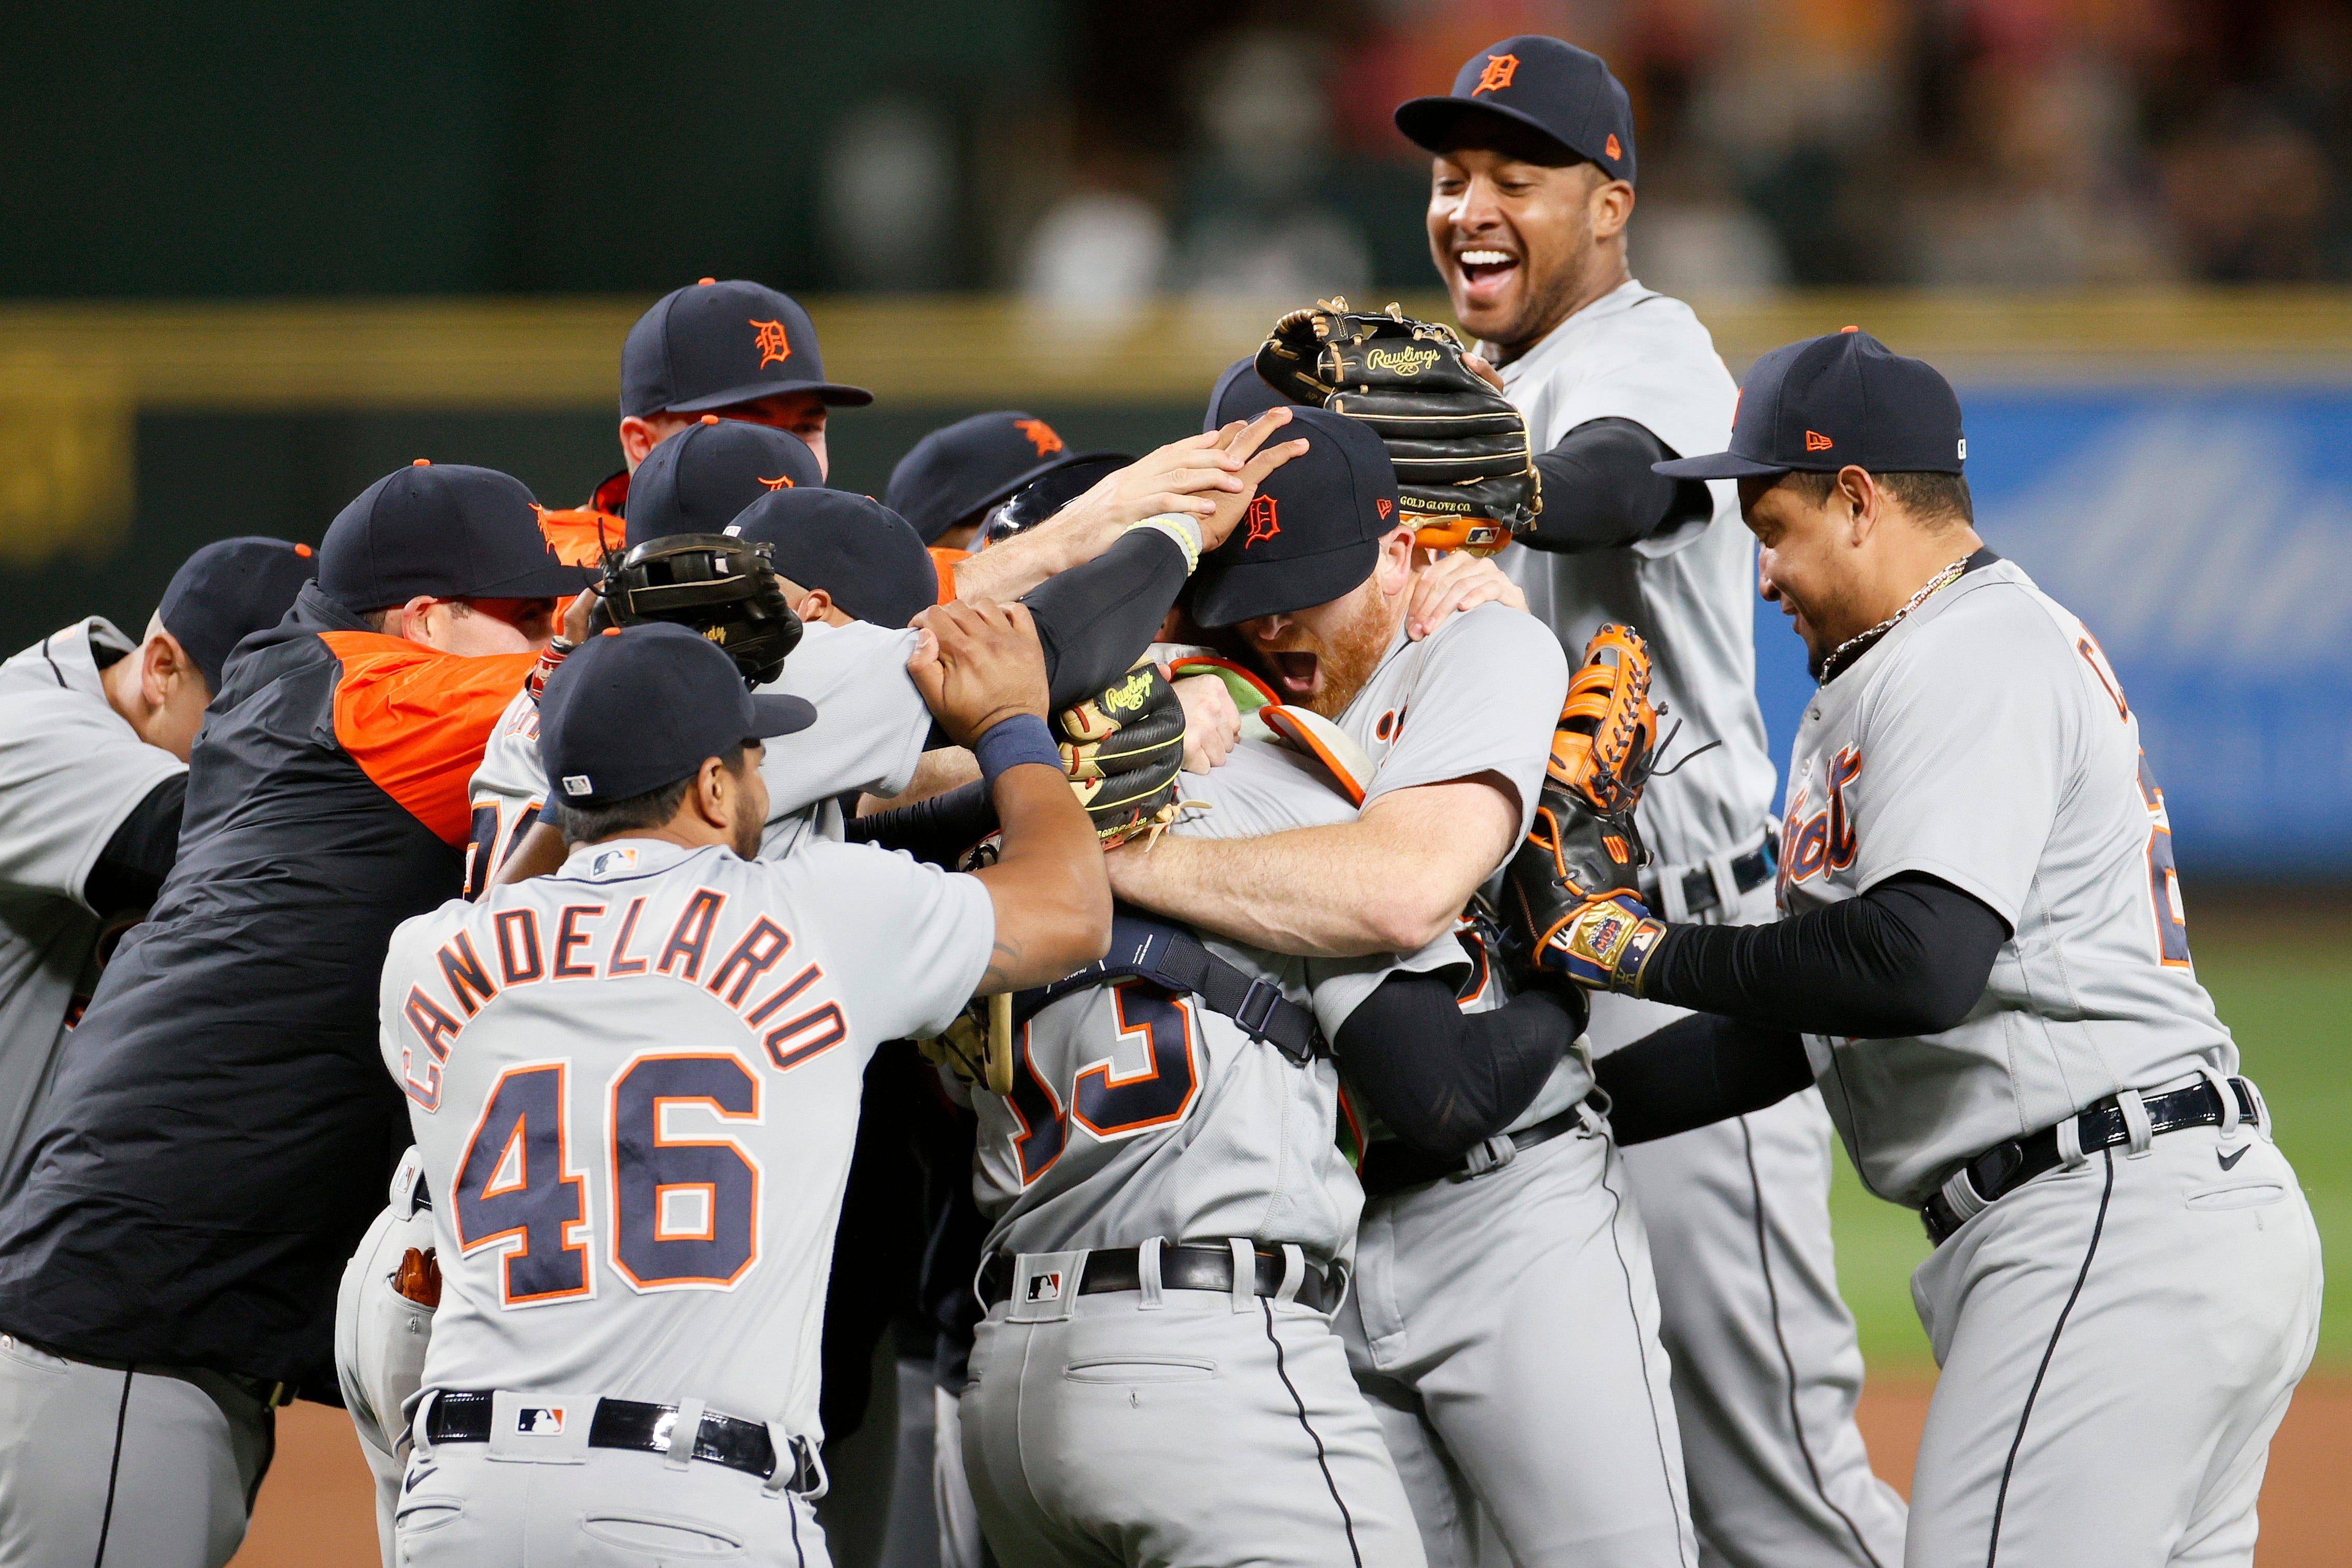 Spencer Turnbull of the Detroit Tigers celebrates with his teammates after his no-hitter against the Seattle Mariners at T-Mobile Park on May 18, 2021 in Seattle.